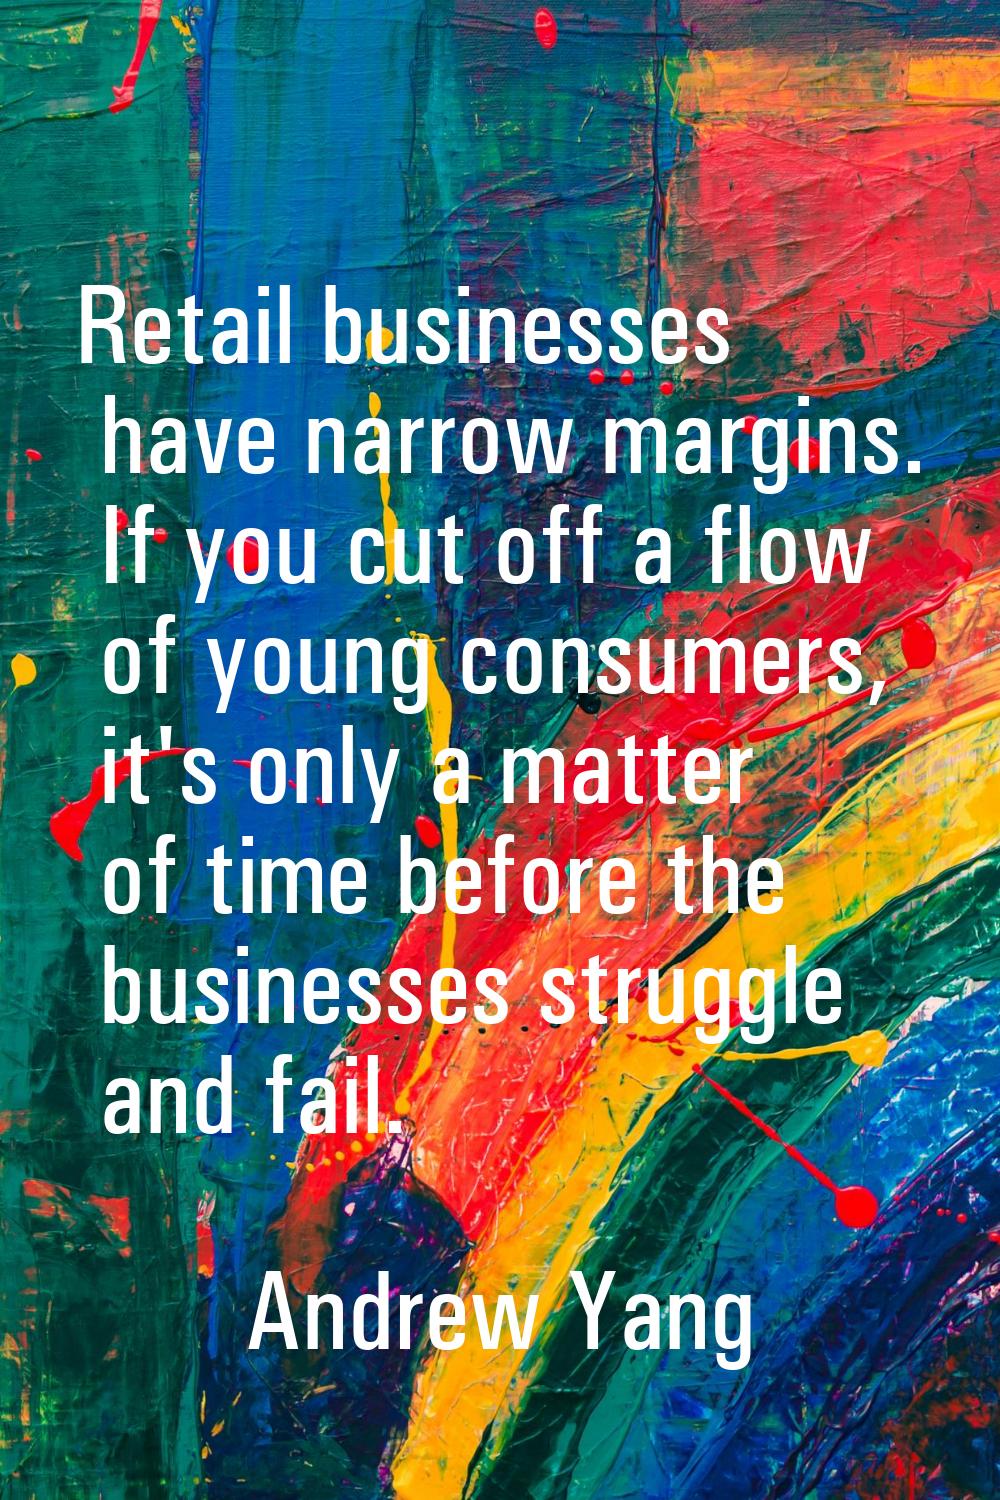 Retail businesses have narrow margins. If you cut off a flow of young consumers, it's only a matter